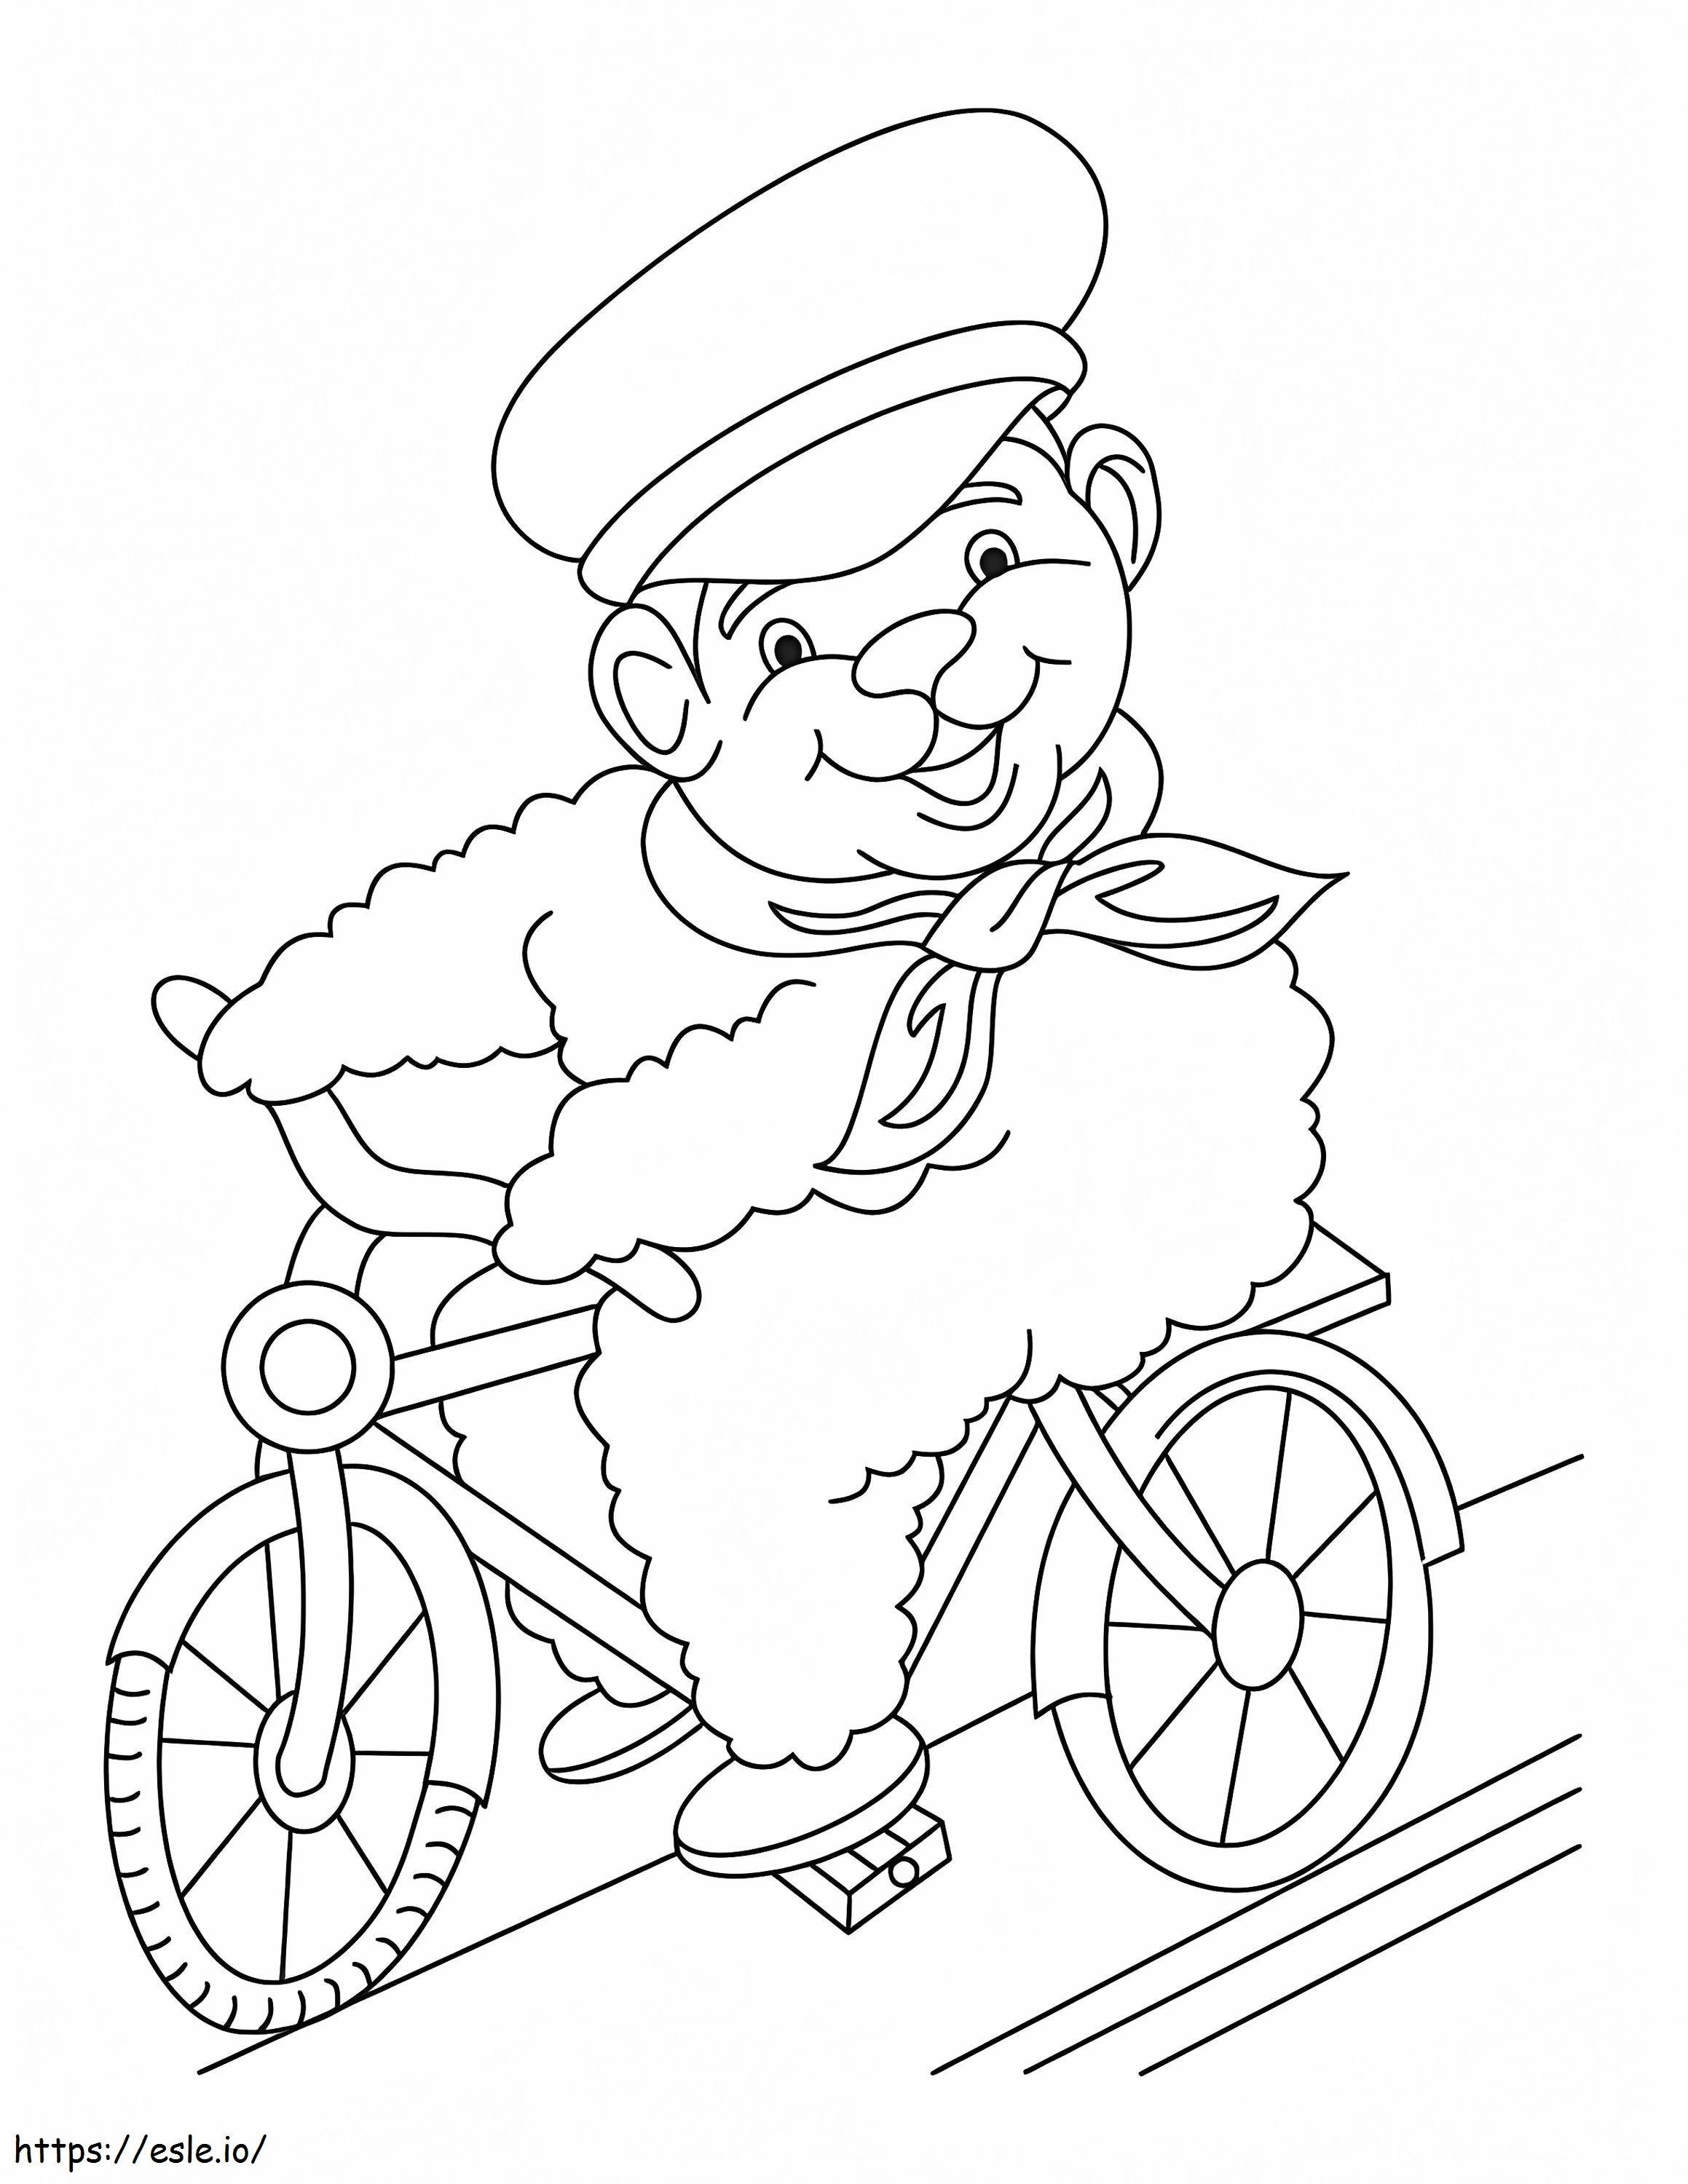 A Man Riding Bicycle coloring page